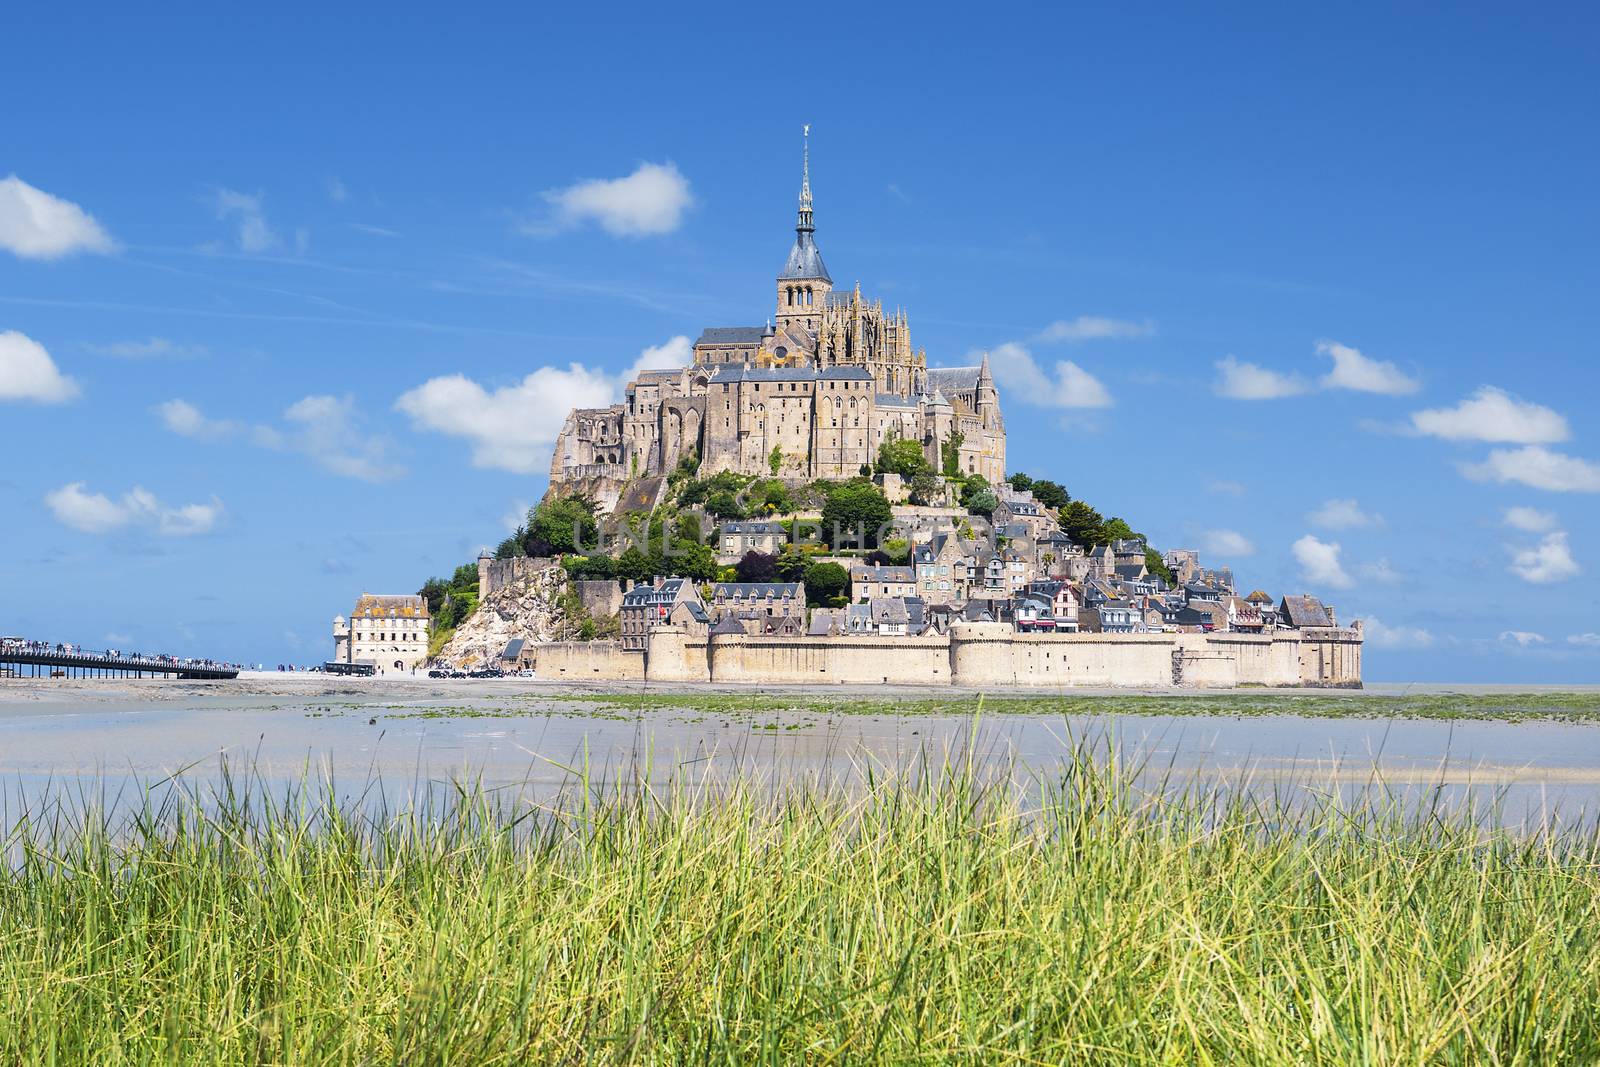 View of famous Mont-Saint-Michel and green grass, France, Europe.